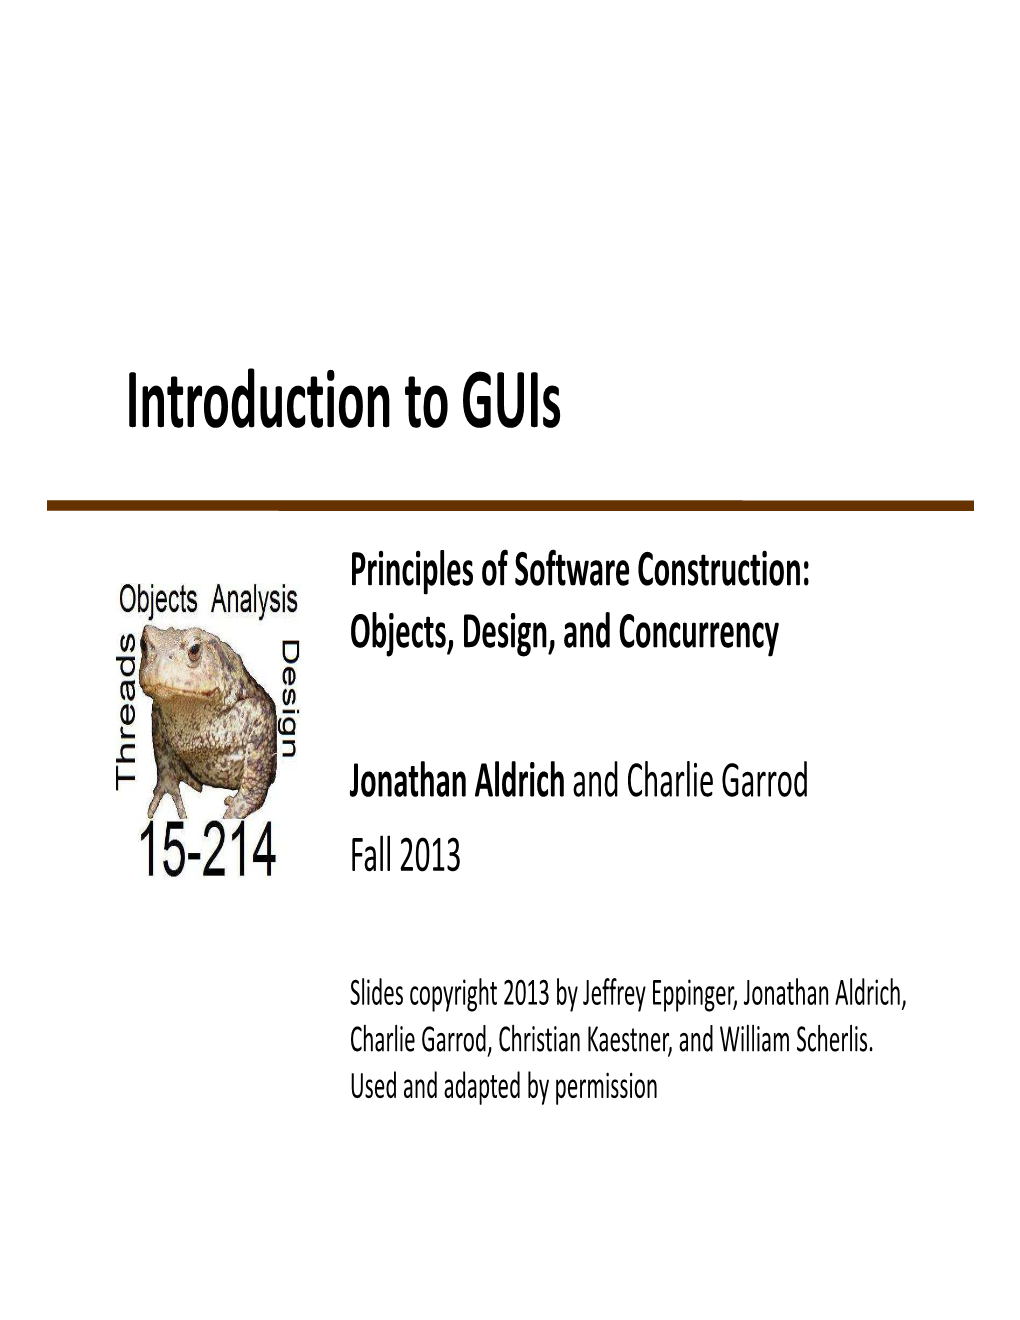 Introduction to Guis